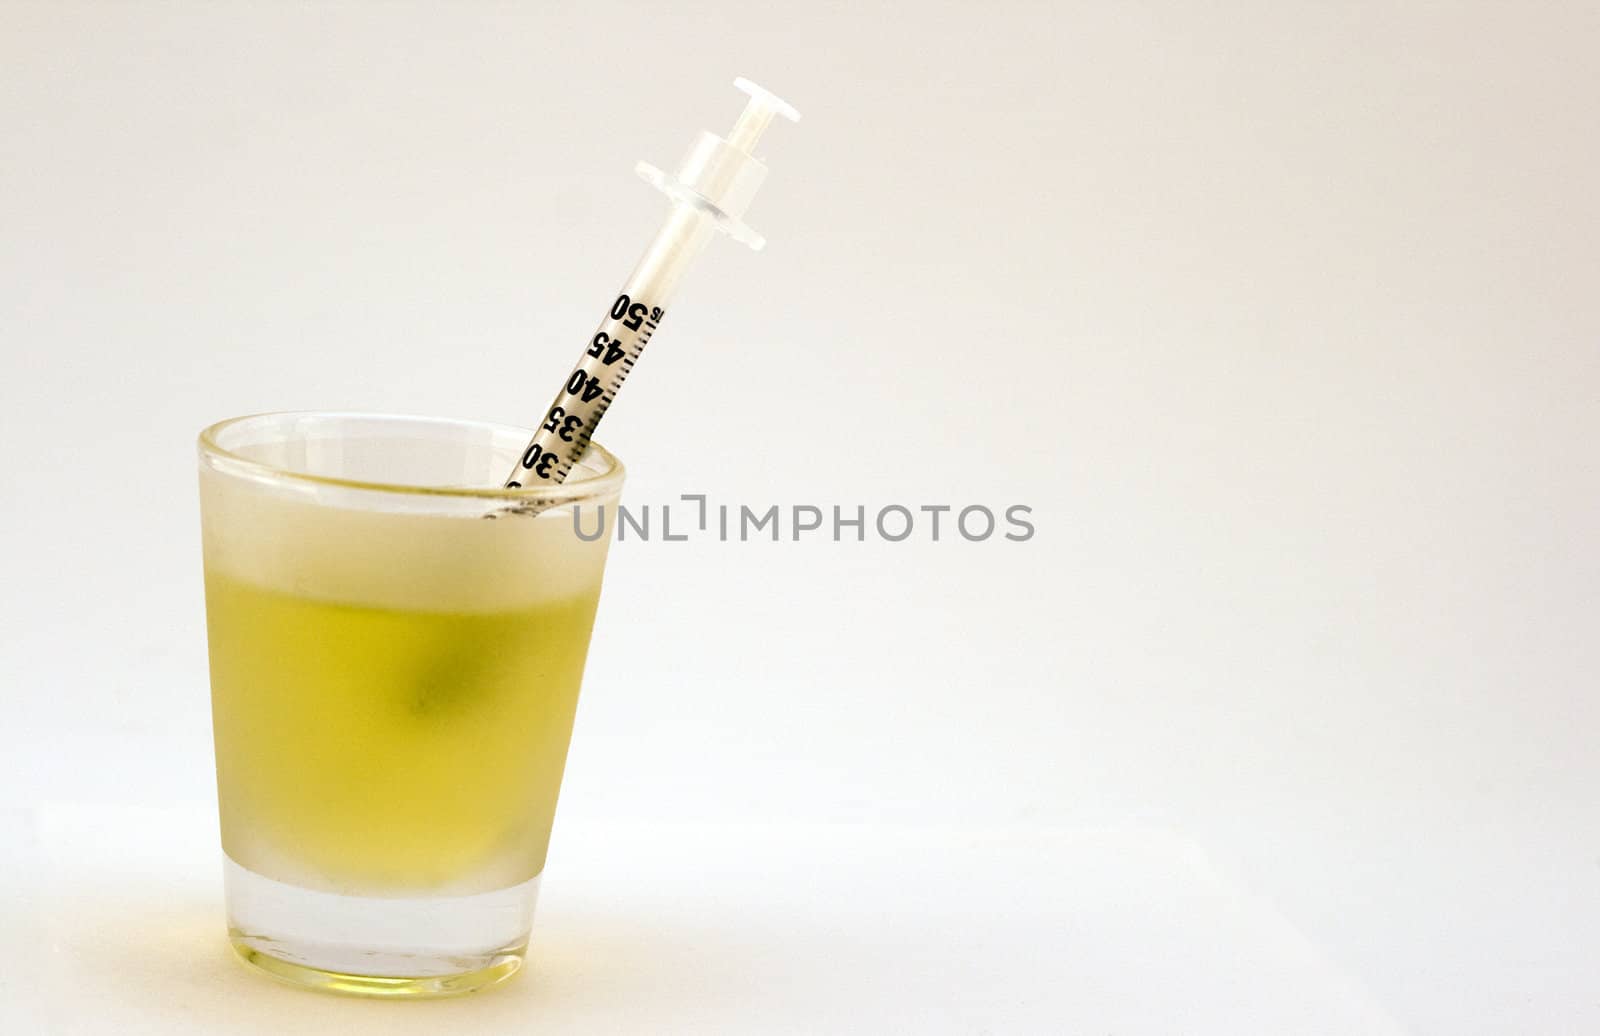 Shot glass and syringe by LWPhotog